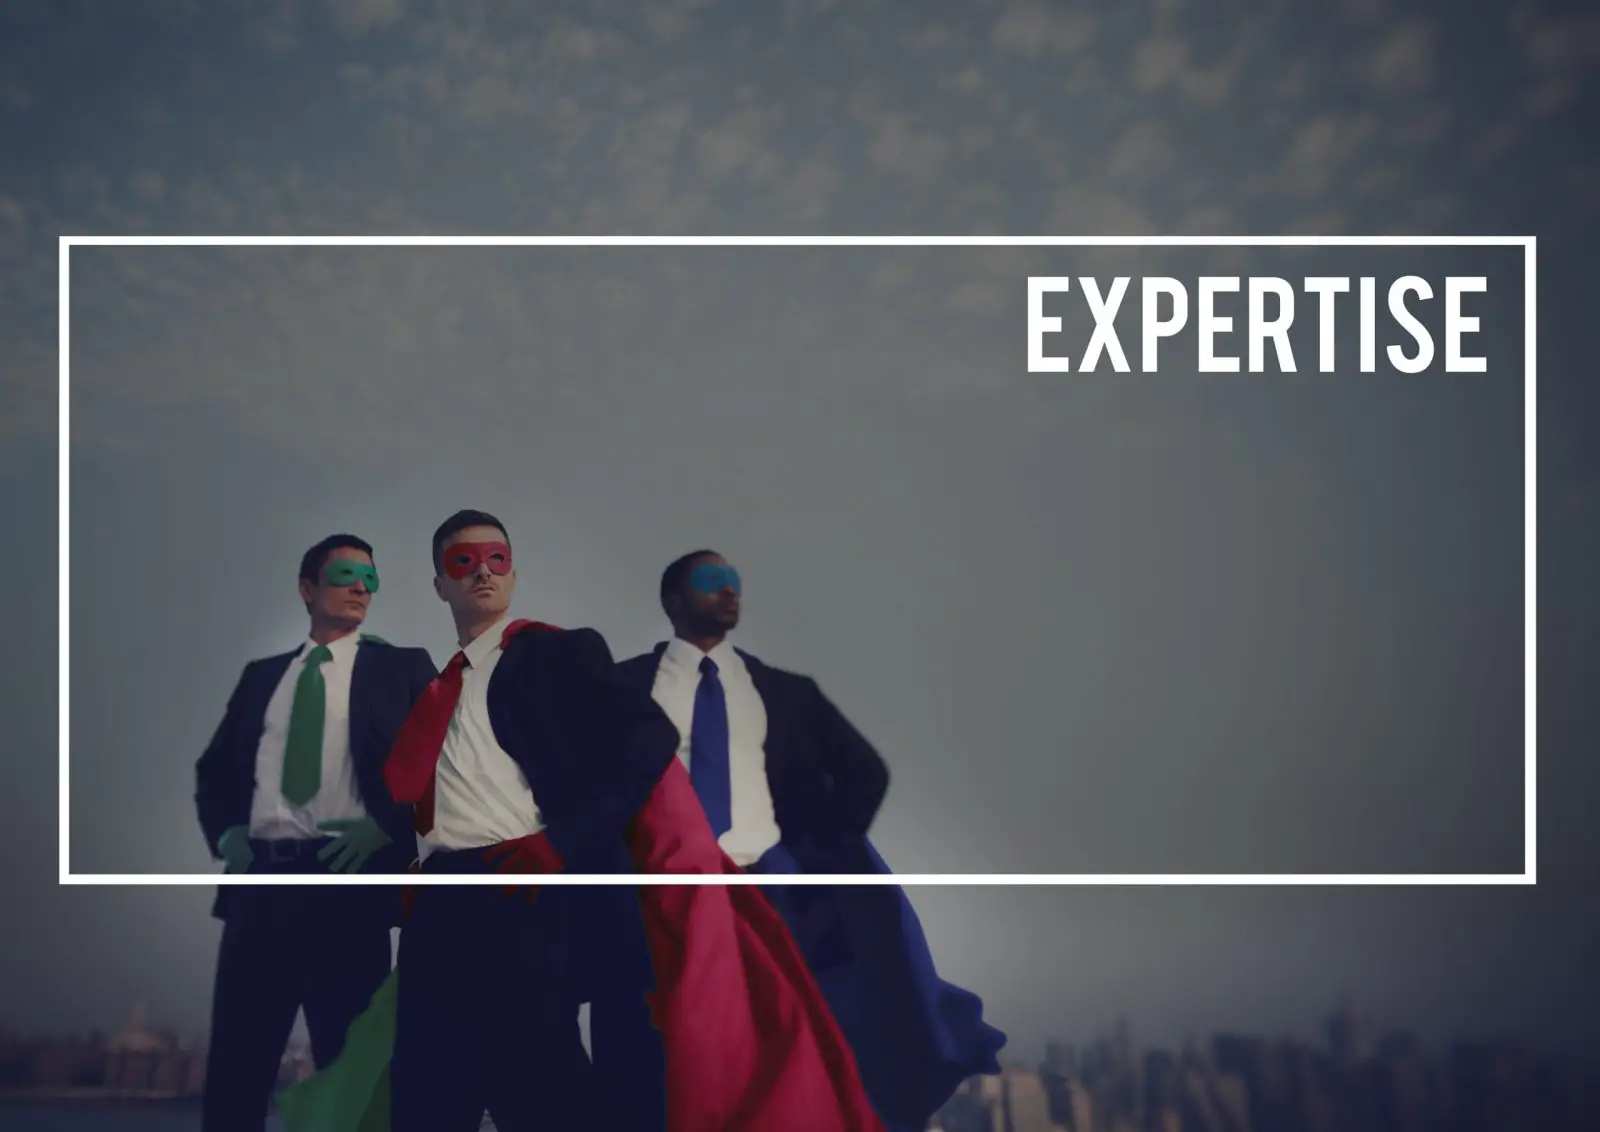 Three men in business suits pose like superheroes wearing capes and masks to show their expertise.